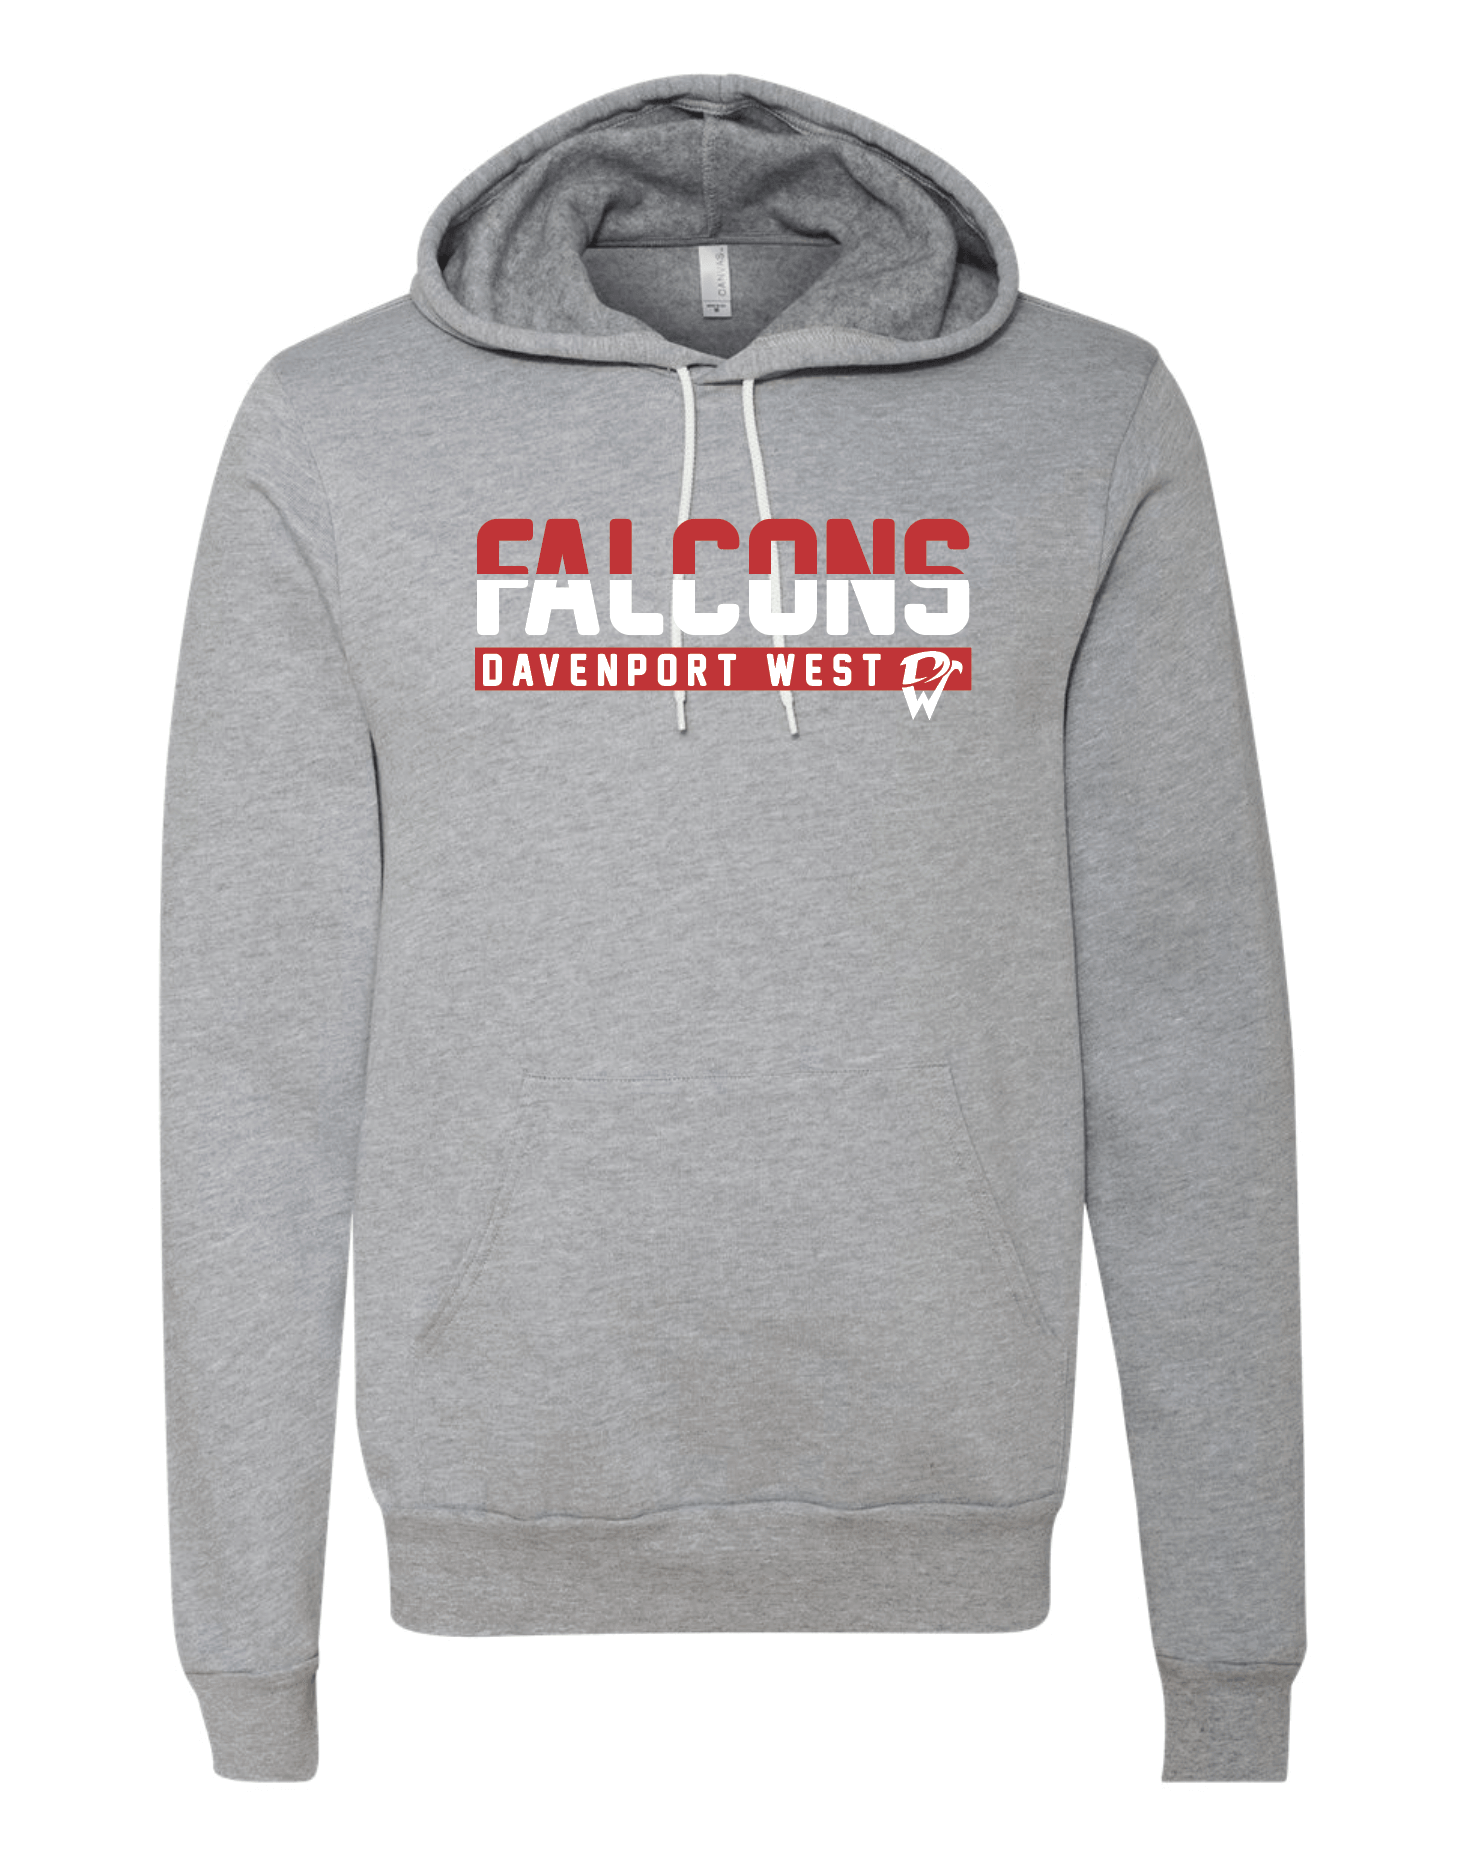 Davenport West Track and Field Hoodie